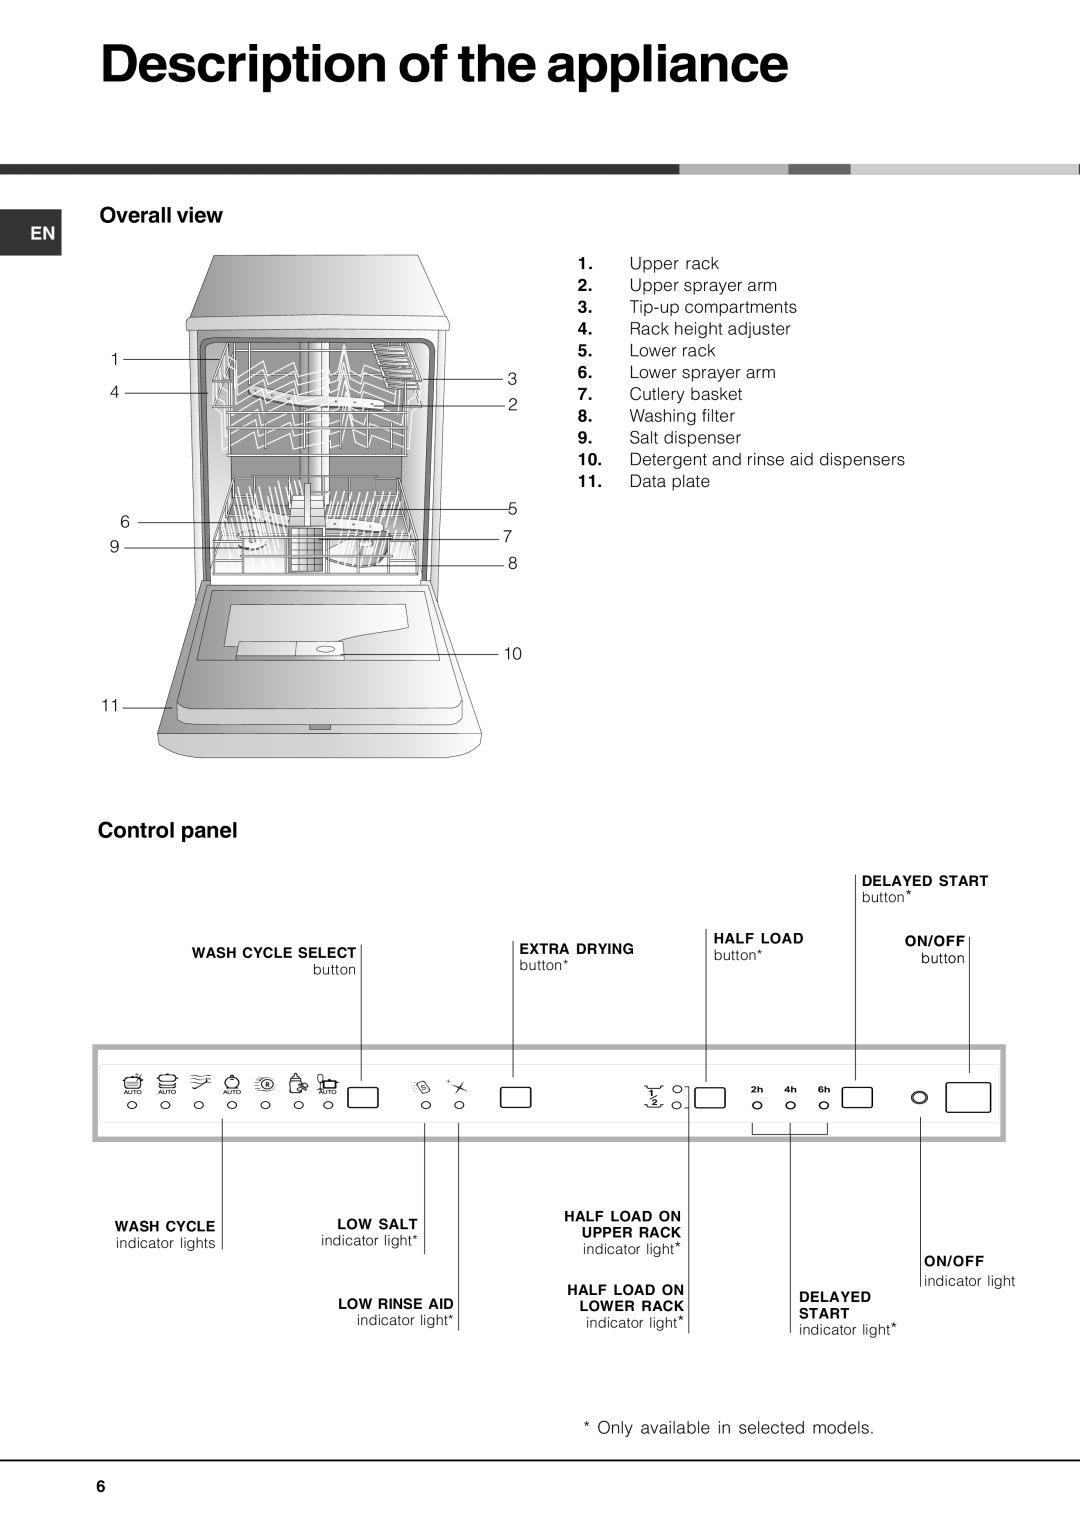 Hotpoint BFQ 700 manual Description of the appliance, Overall view, Control panel 